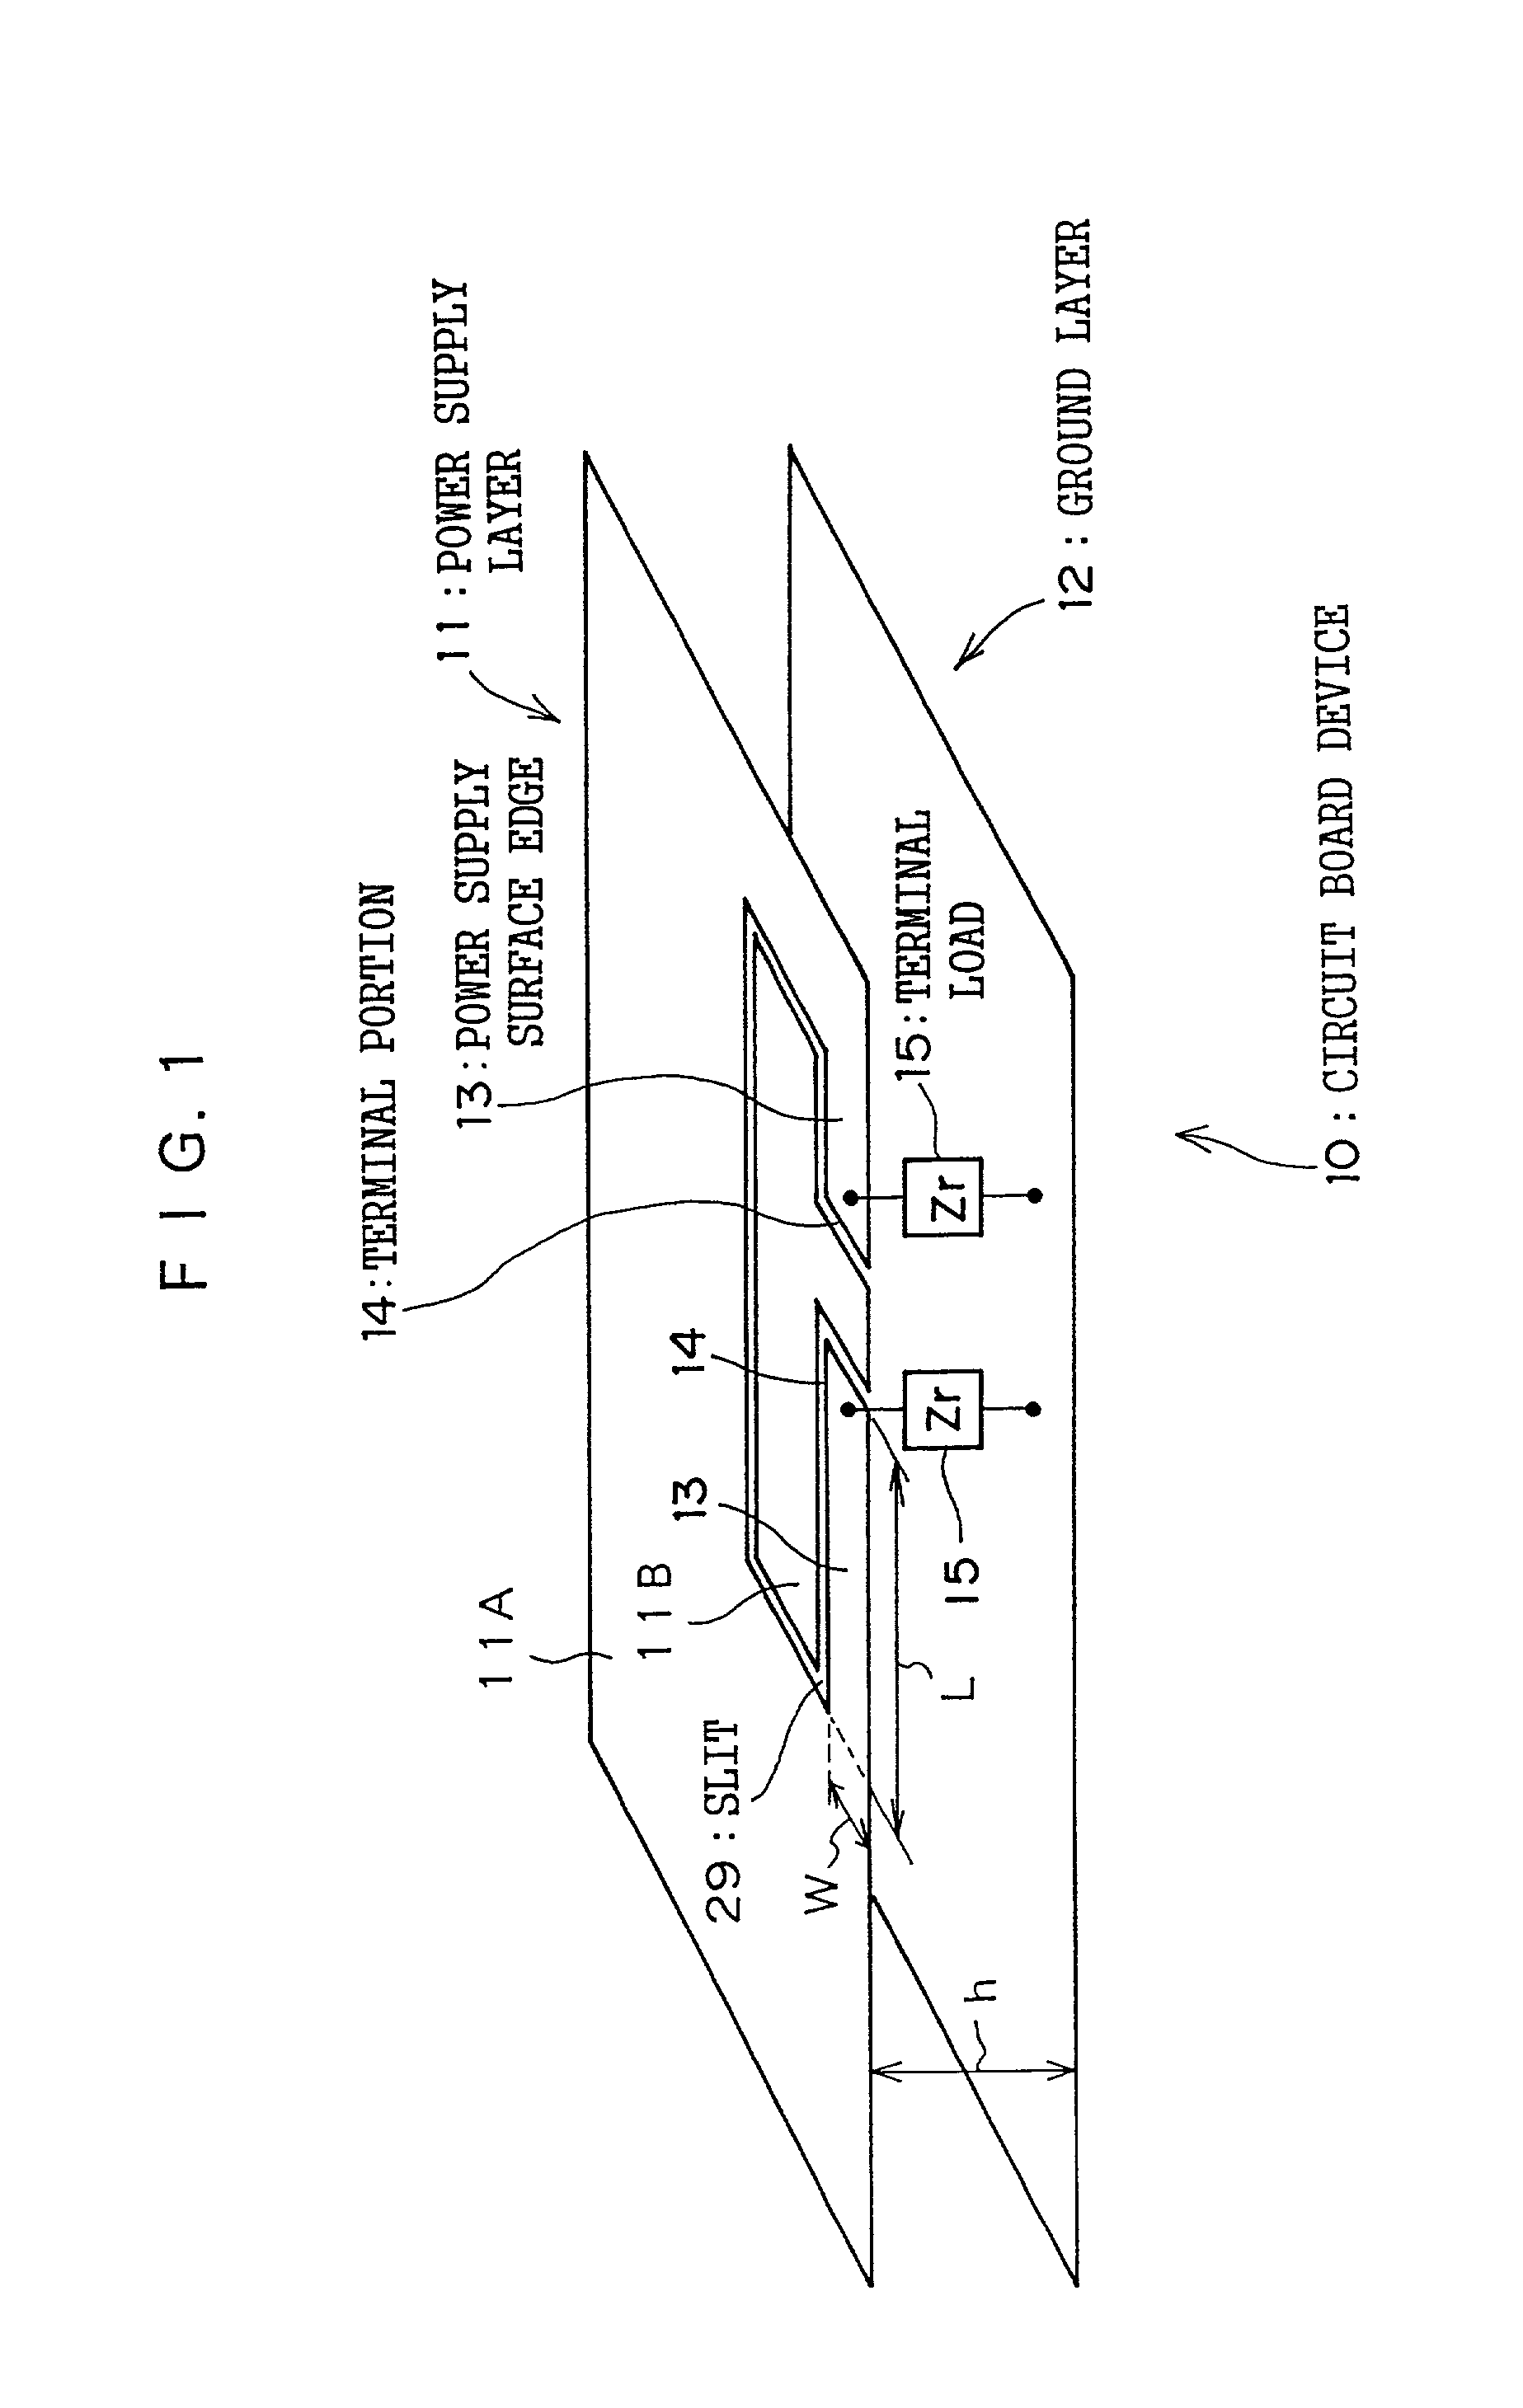 Circuit board device and design support device